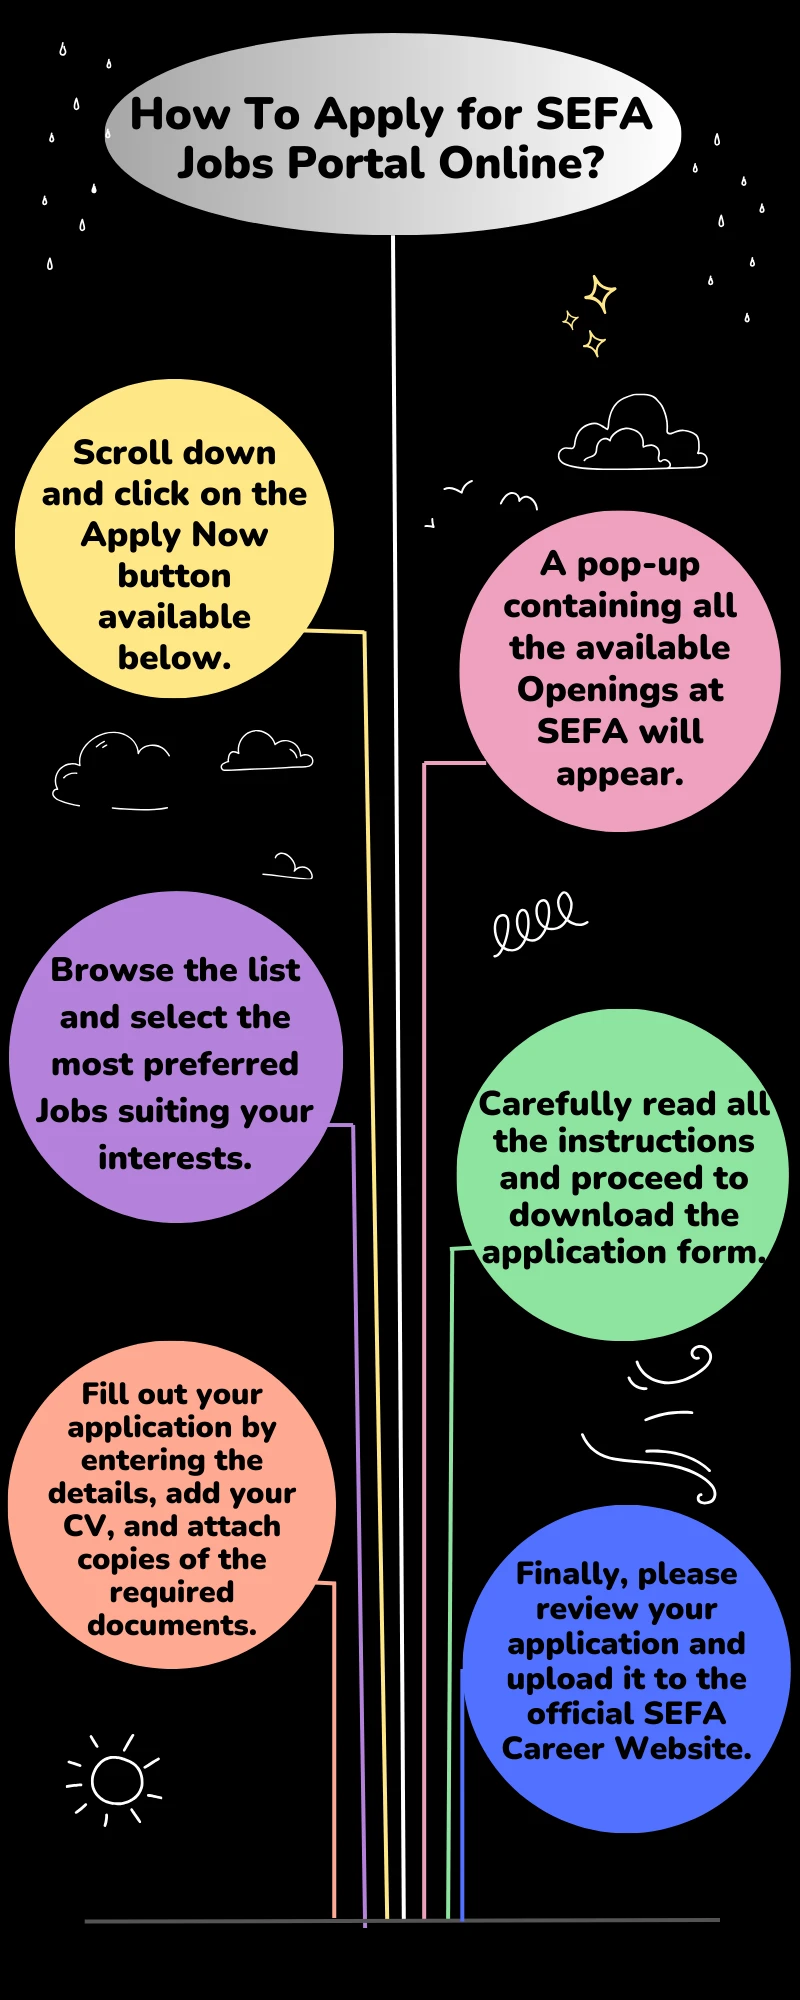 How To Apply for SEFA Jobs Portal Online?